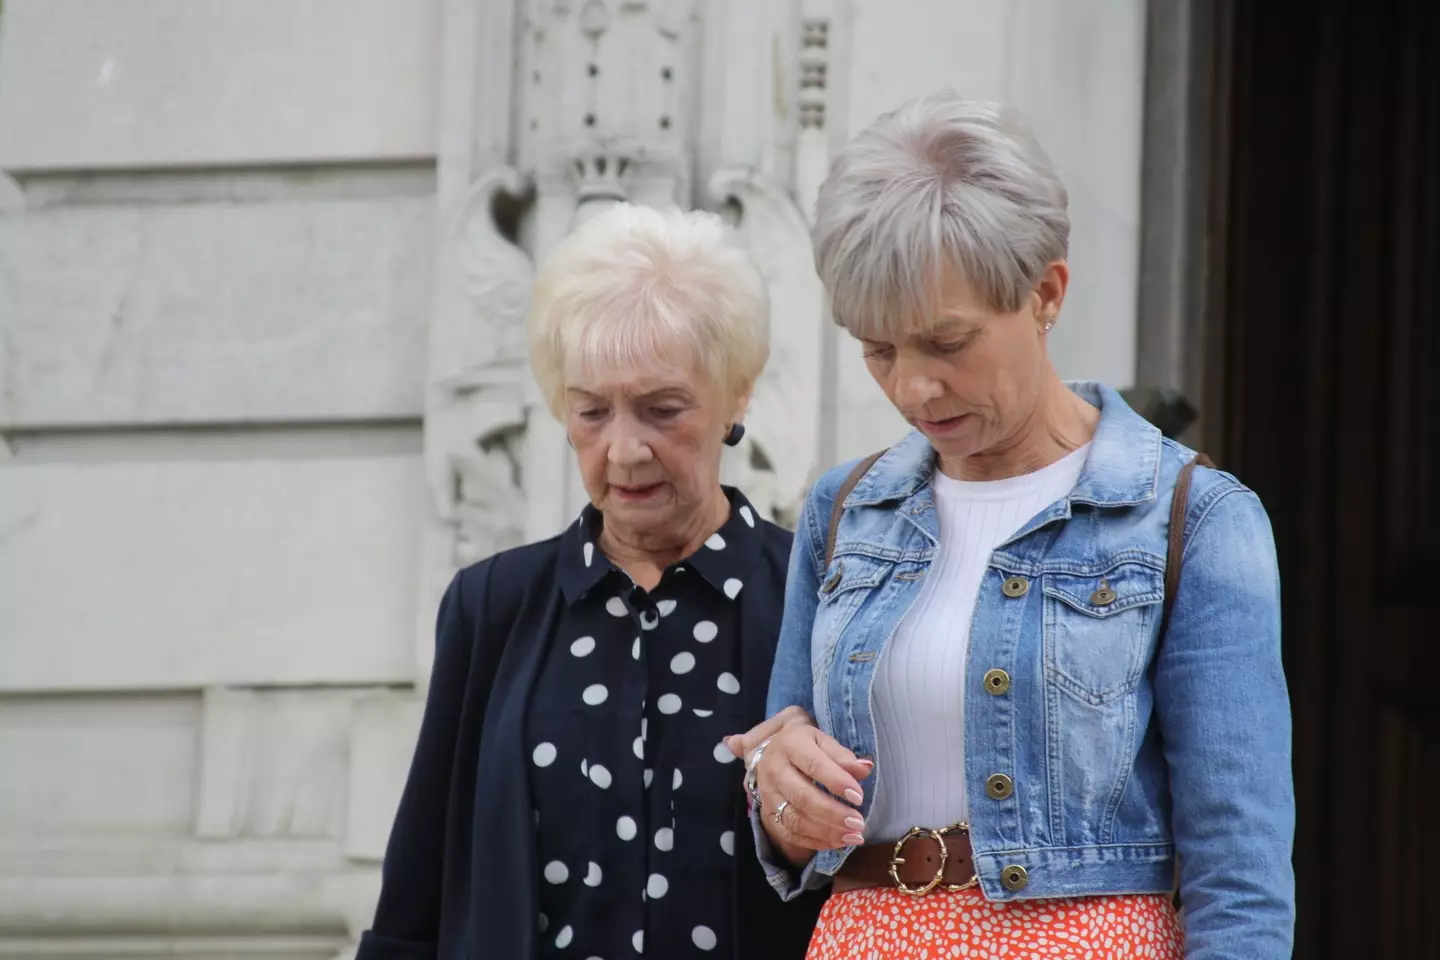 'Britain oldest loan shark' narrowly avoided jail time due to her advancing years.